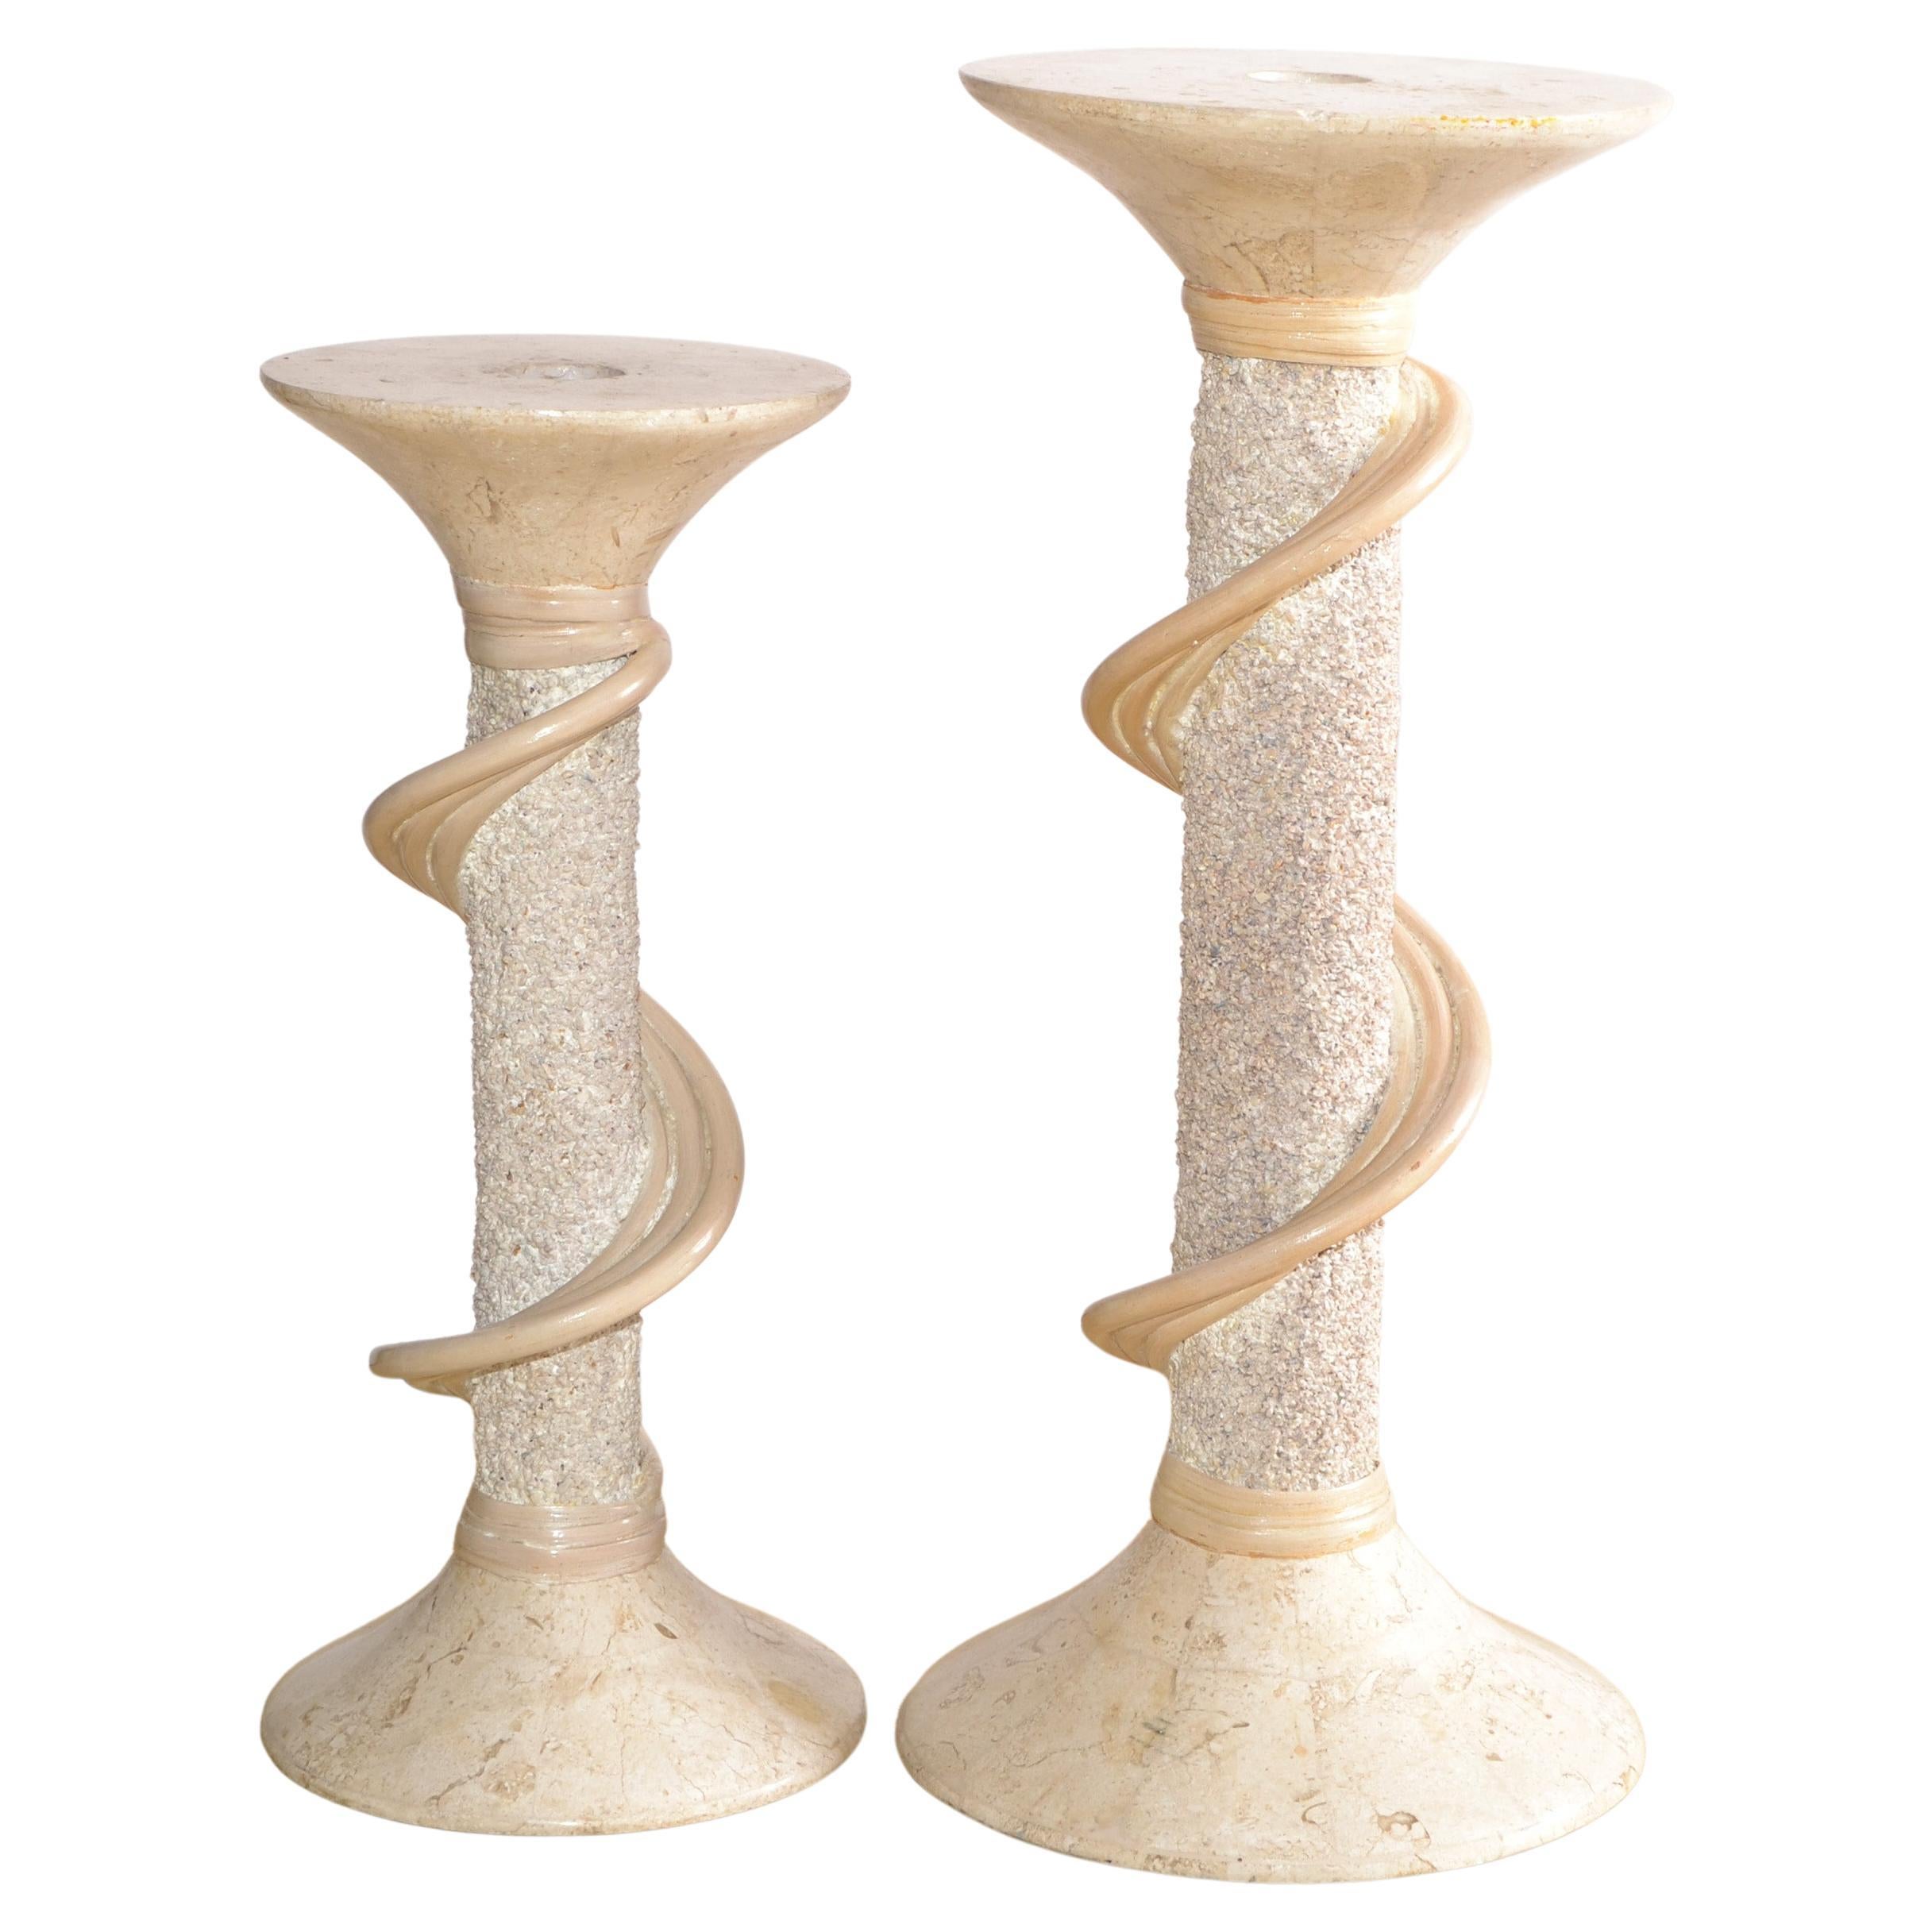 Set of 2 Renoir Designs handcrafted Marble Soapstone Candle Holder Sticks Hollywood Regency Period made in the Philippines.
Height measures: 
12.38 inches tall and 10 inches tall with 4.5 base diameter.
Candle hole diameter 0.75 inches.
Original